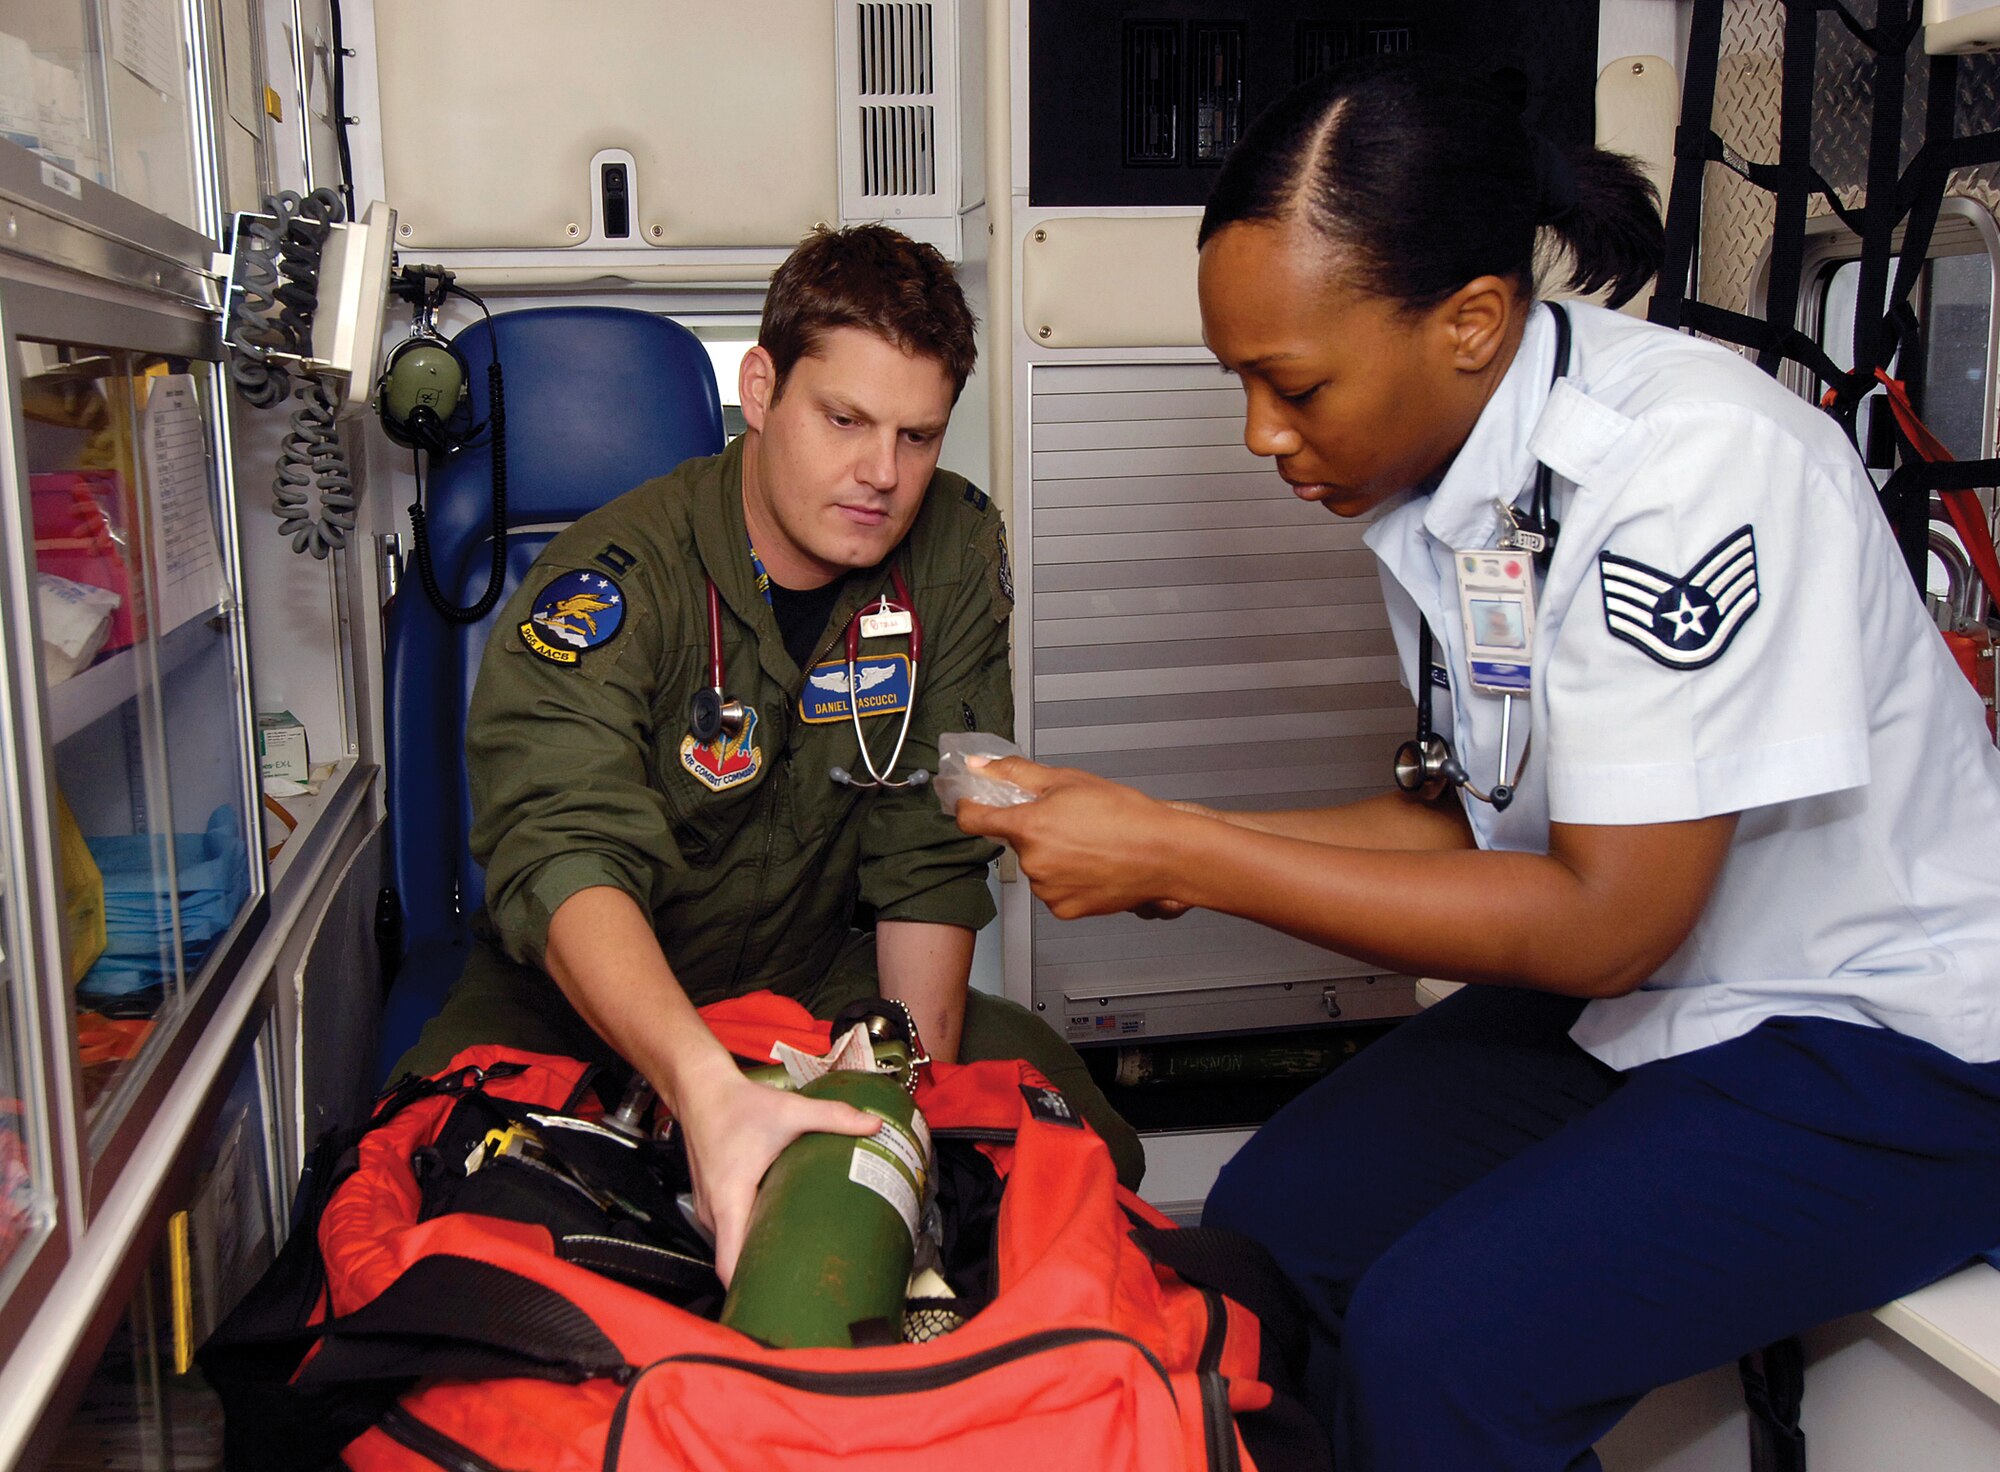 Dr. (Capt.) Dan Pascucci and Staff Sgt. Brandi Kelley check a 72nd Medical Group ambulance to ensure it’s ready for any in-flight emergency calls. Both are with the 965th Airborne Air Control Squadron, caring for 350 people in their squadron and also serving Tinker’s Airmen in the Flight Medicine Clinic. Sergeant Kelley is an independent duty medical technician who works closely with Dr. Pascucci. Here, and especially during deployments, the “super medic” works side-by-side with Dr. Pascucci on all aspects of patient care. (Air Force photo by Margo Wright)